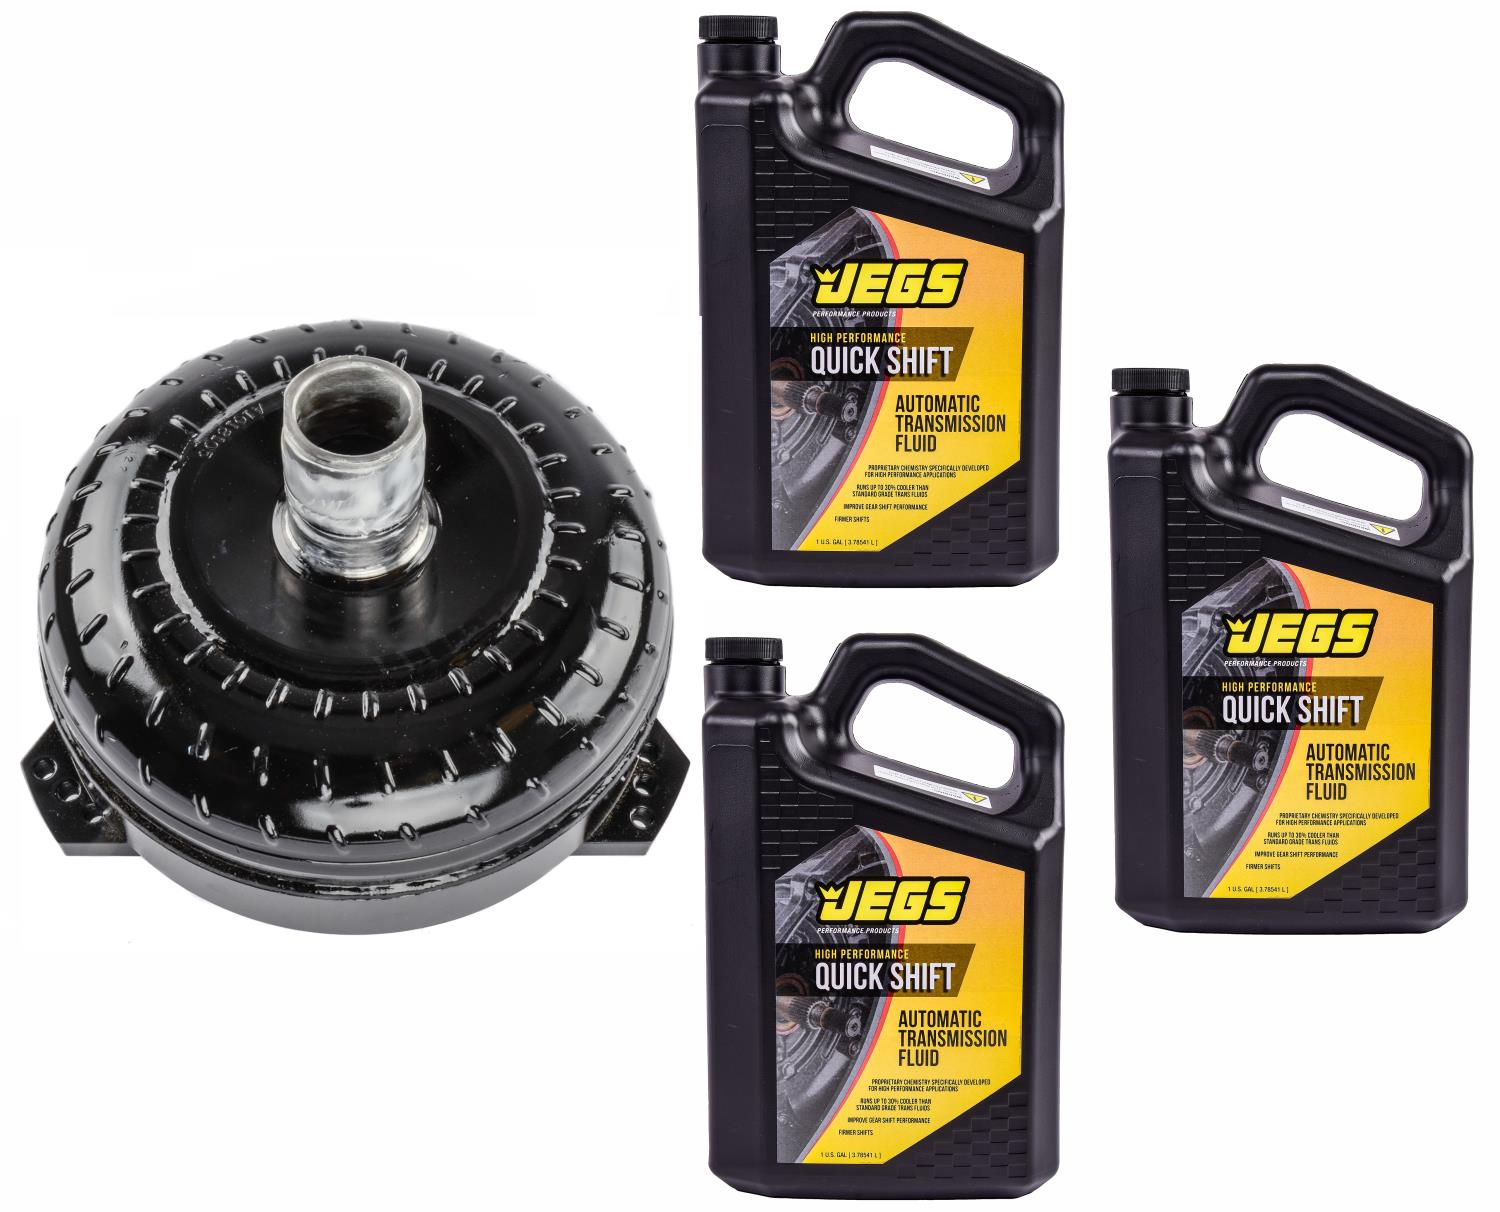 Torque Converter Kit for GM 700R4 [2800-3200 RPM Stall Speed]